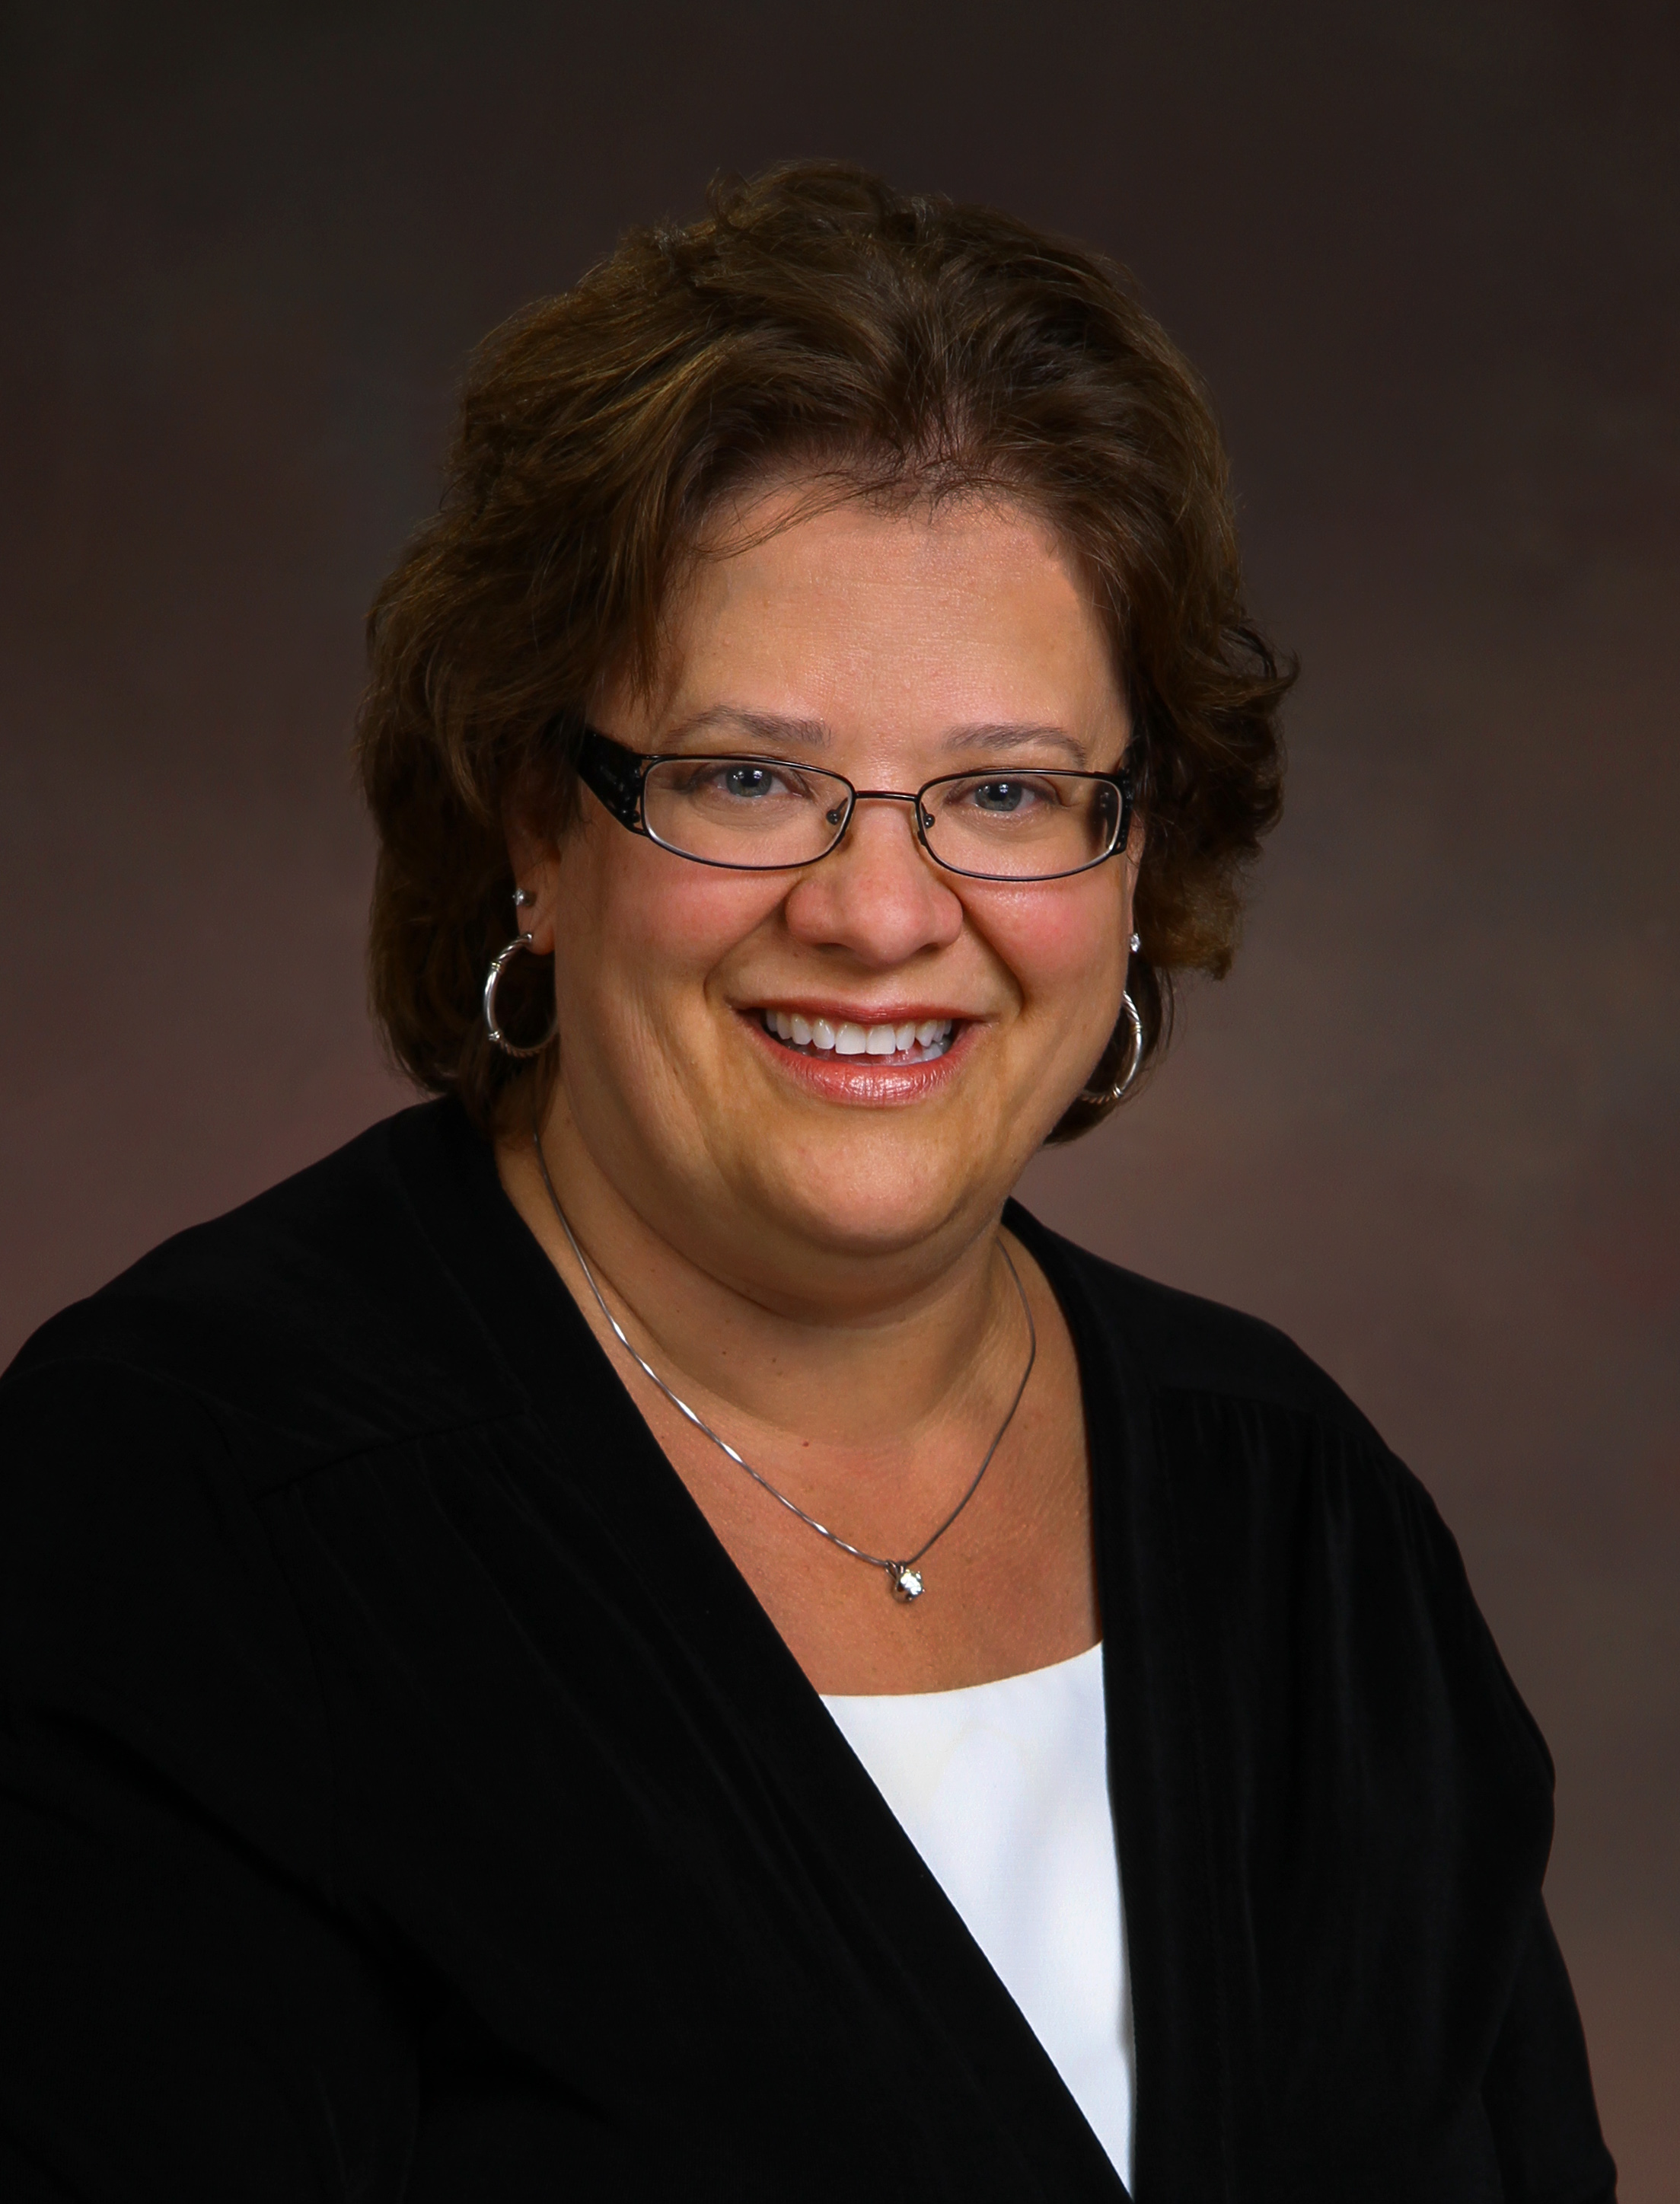 Lynne Coy-Ogan, Ed.D., is provost and senior vice president for academic affairs at Husson University.